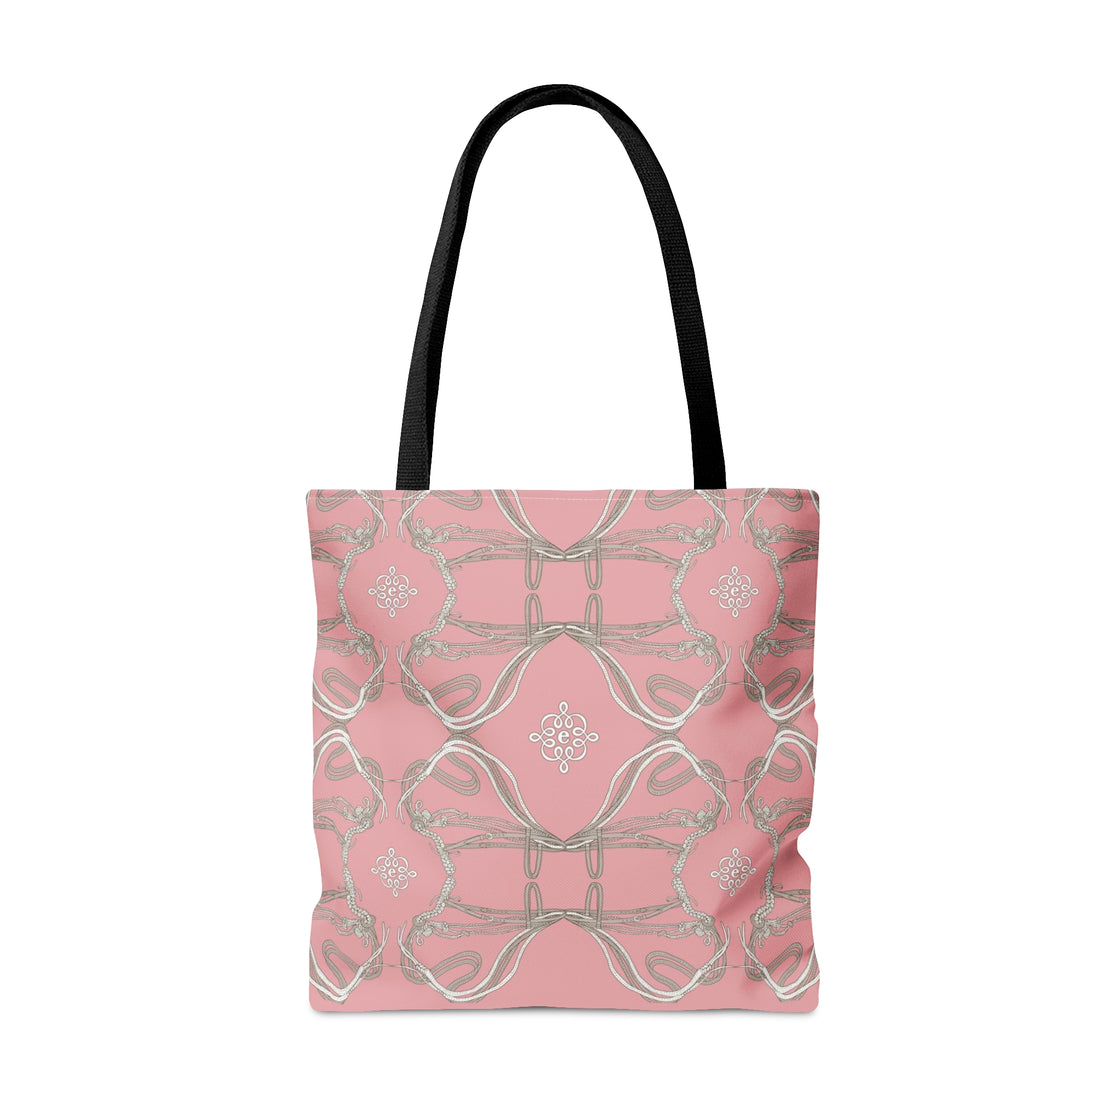 Tote Bag in Roped Bridles on Rose